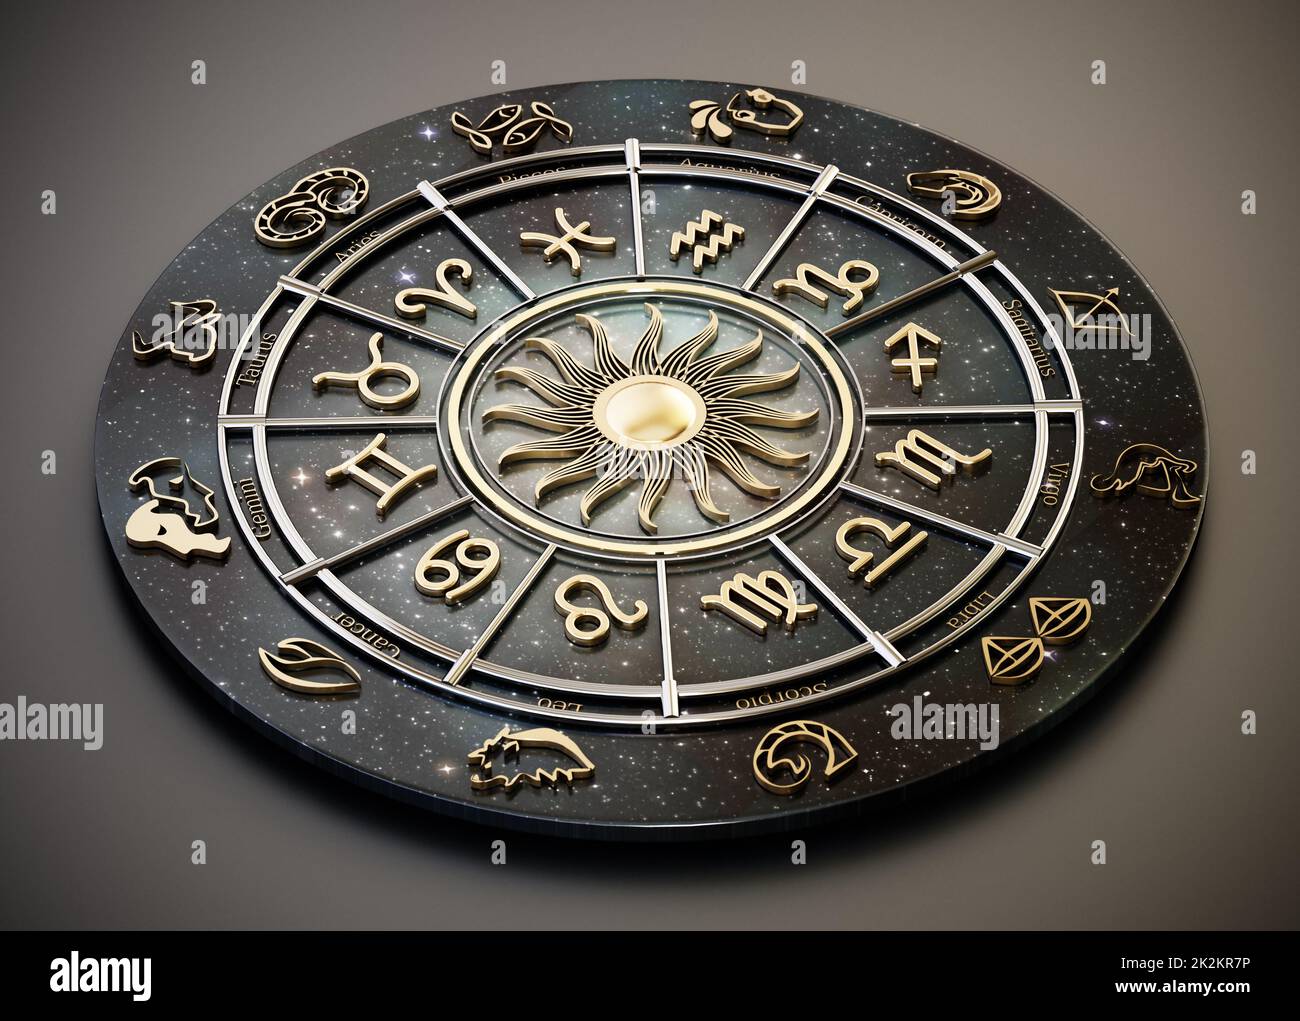 The horoscope wheel with Zodiac signs and constellations of the zodiac. 3D illustration Stock Photo